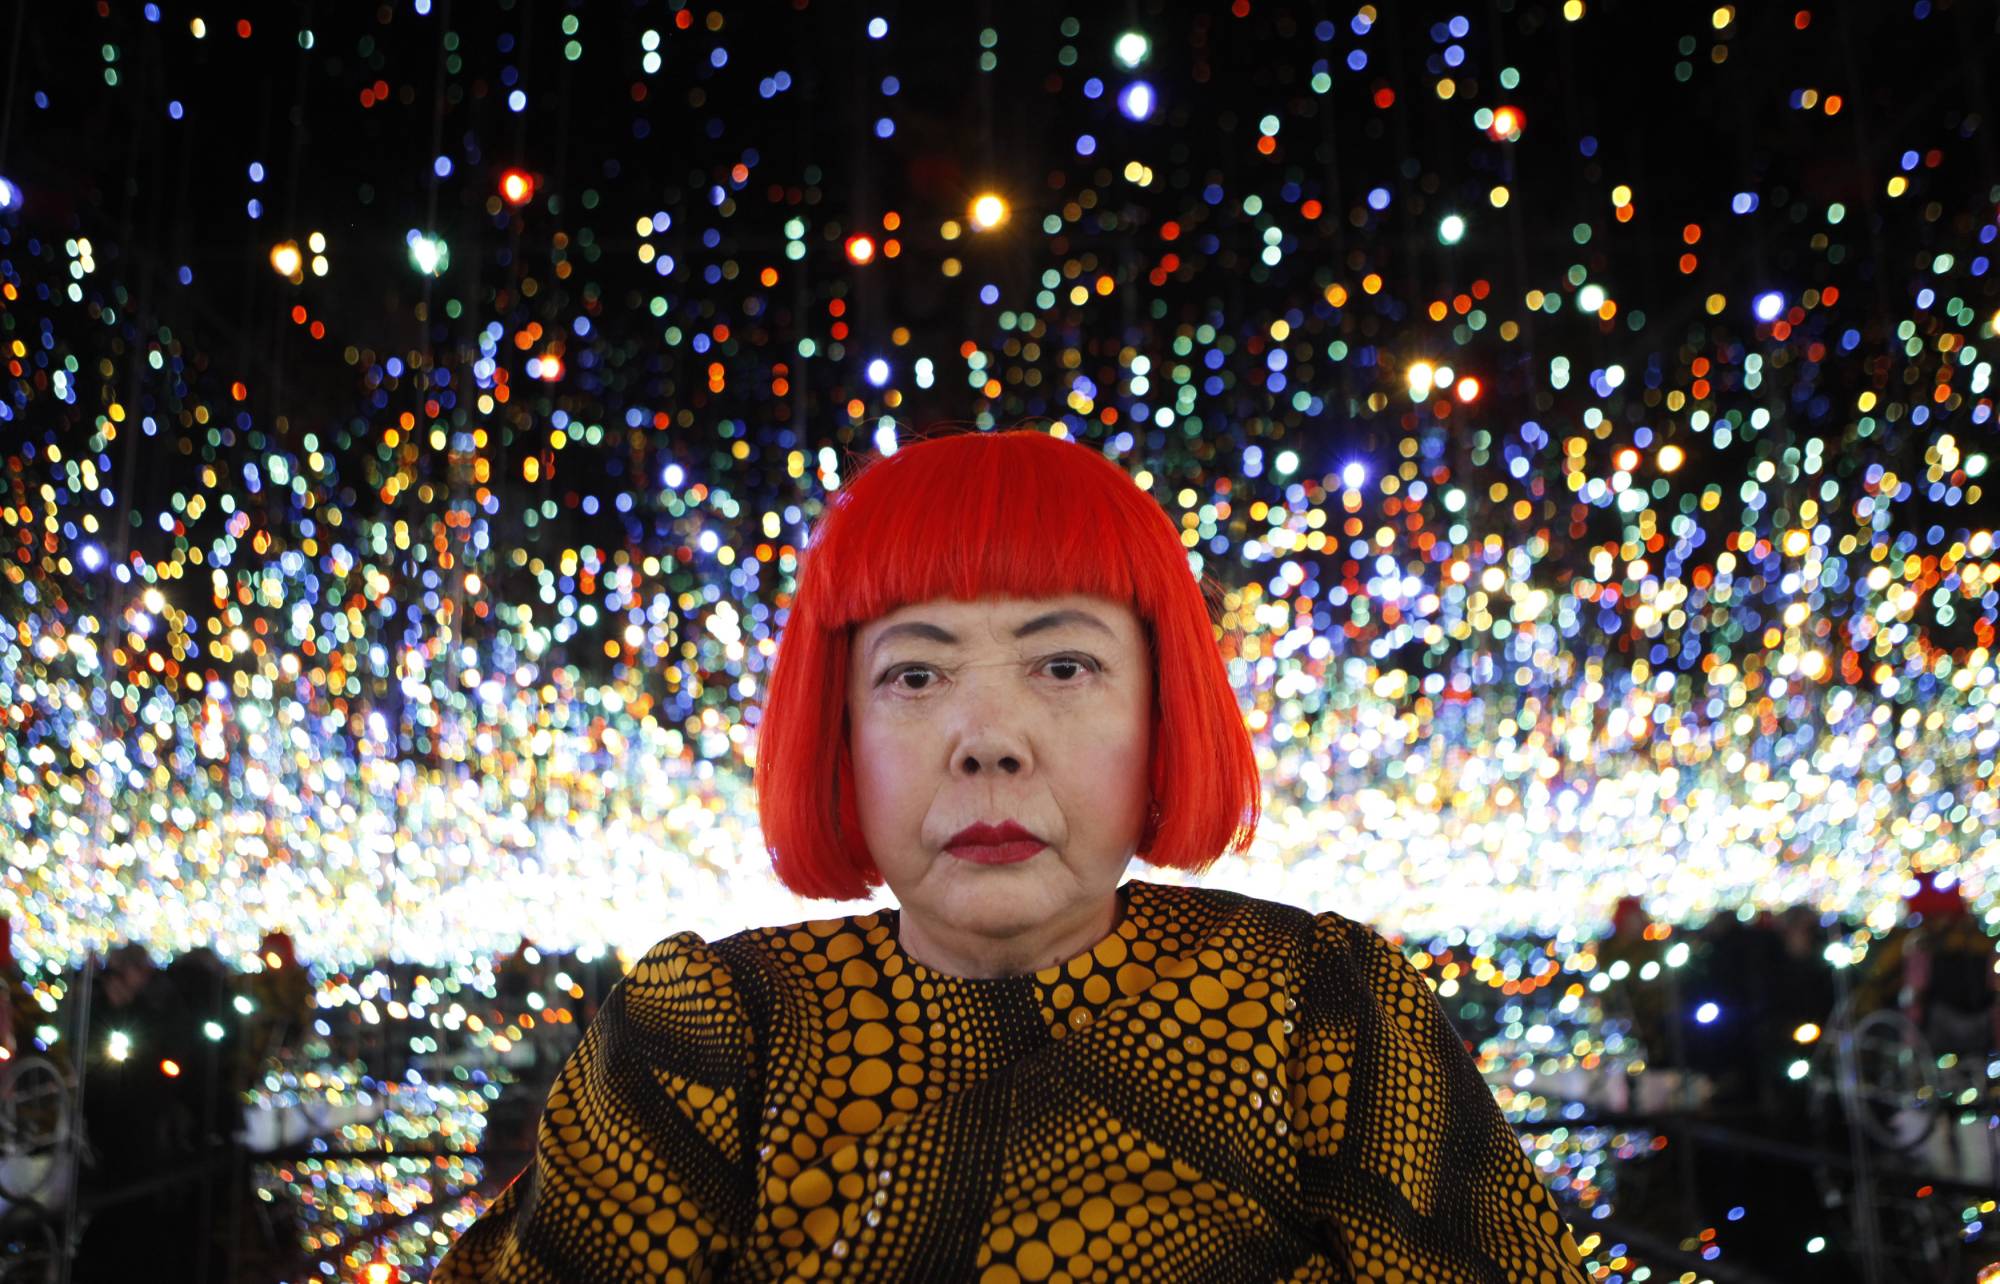 As the artist approaches her mid-90s, Yayoi Kusama has turned her own persona into one of the themes of her life’s work and become an obsession for the global cultural zeitgeist.  | REUTERS